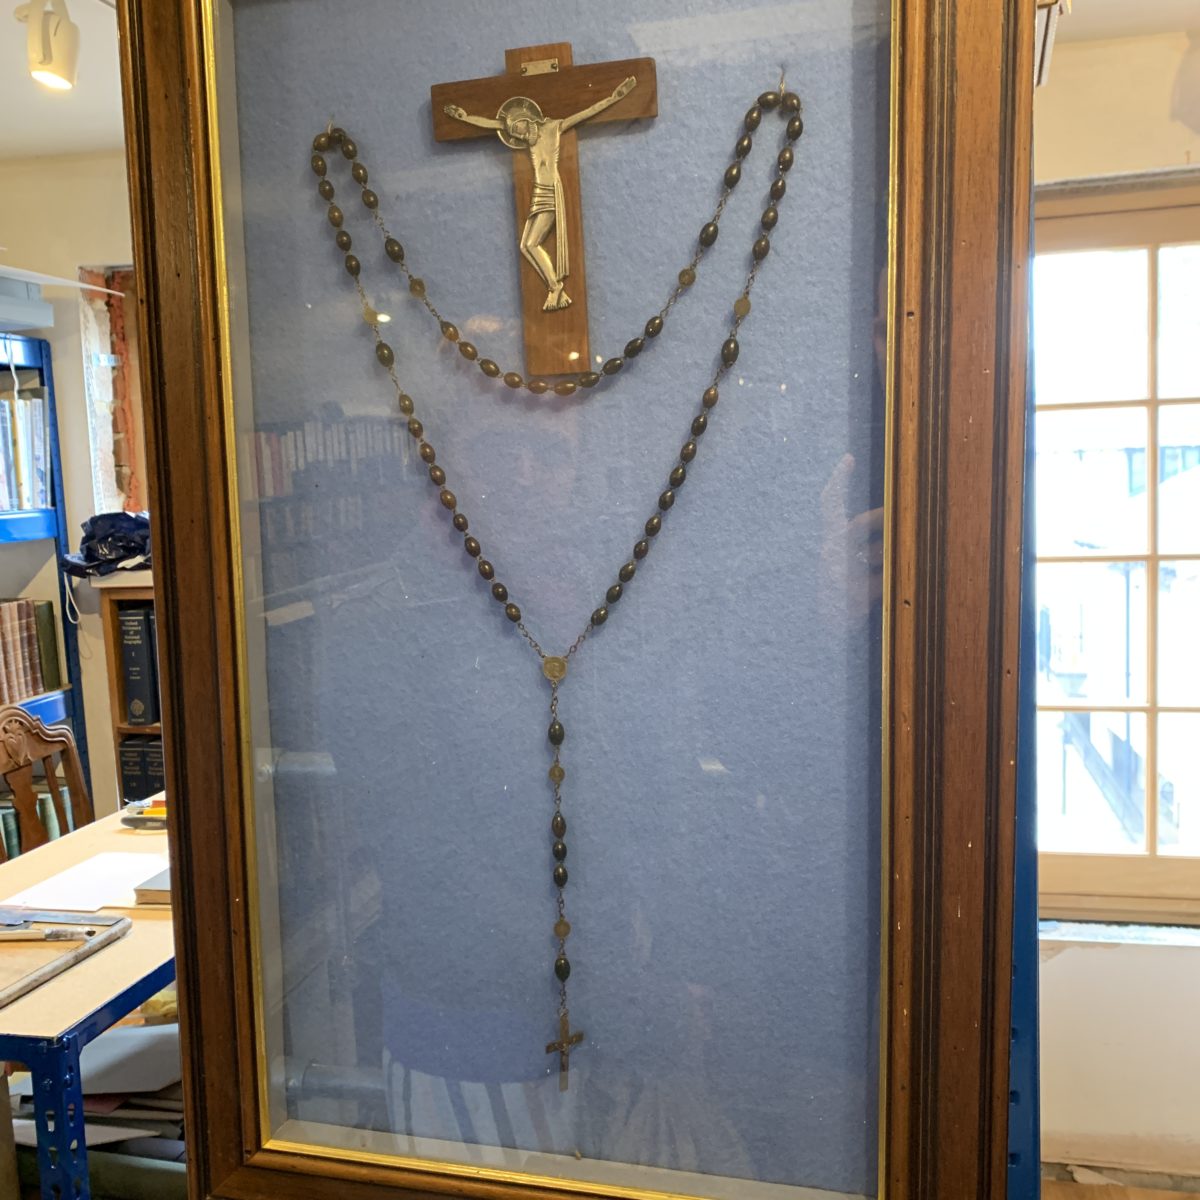 G.K. Chesterton's rosary and crucifix